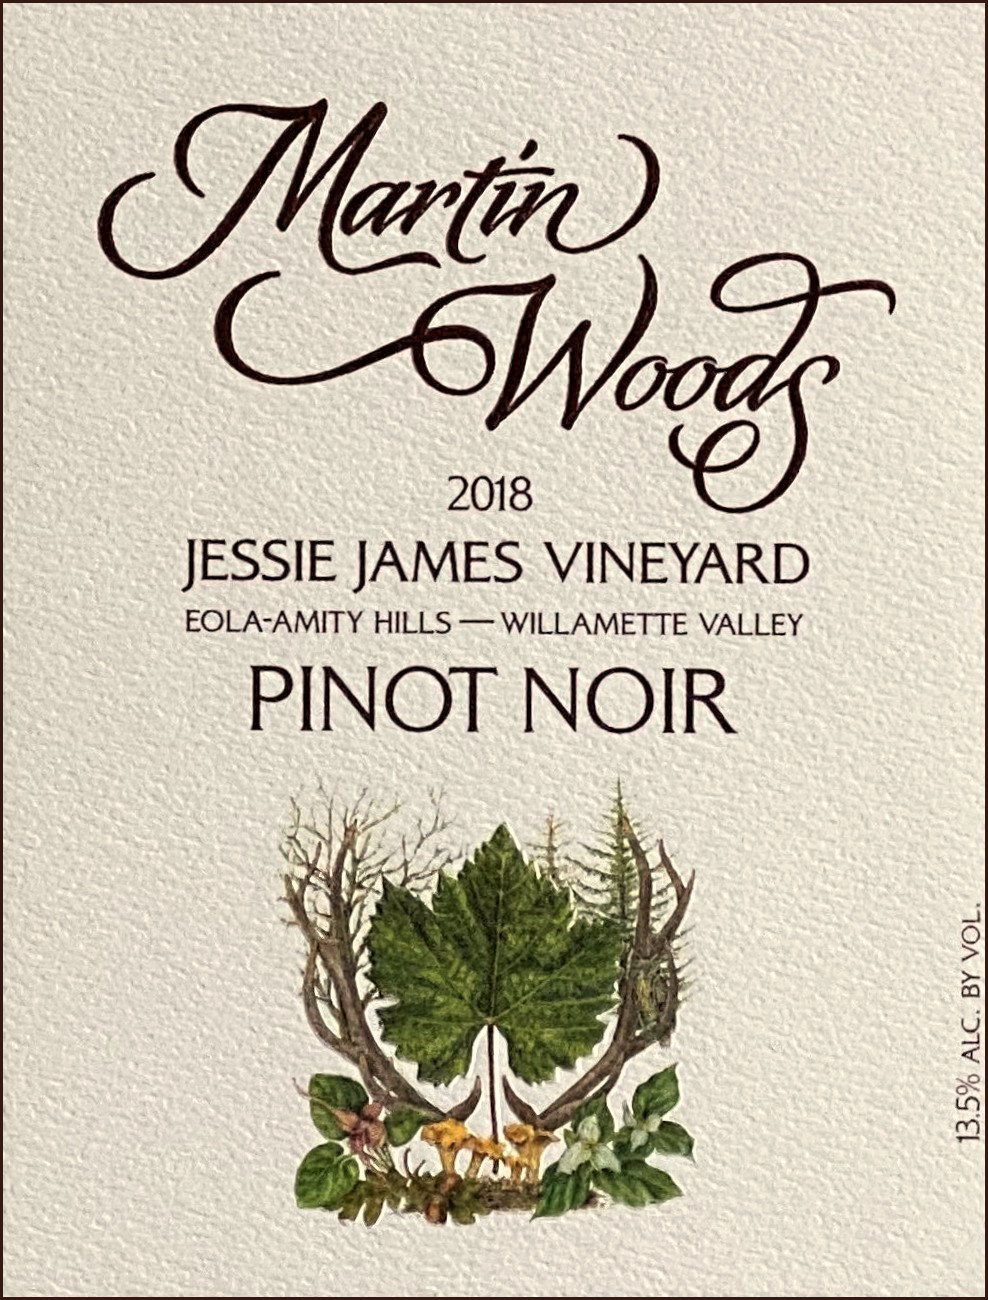 Martin Woods – Willamette Valley Wine Producer – Oregon Wines of